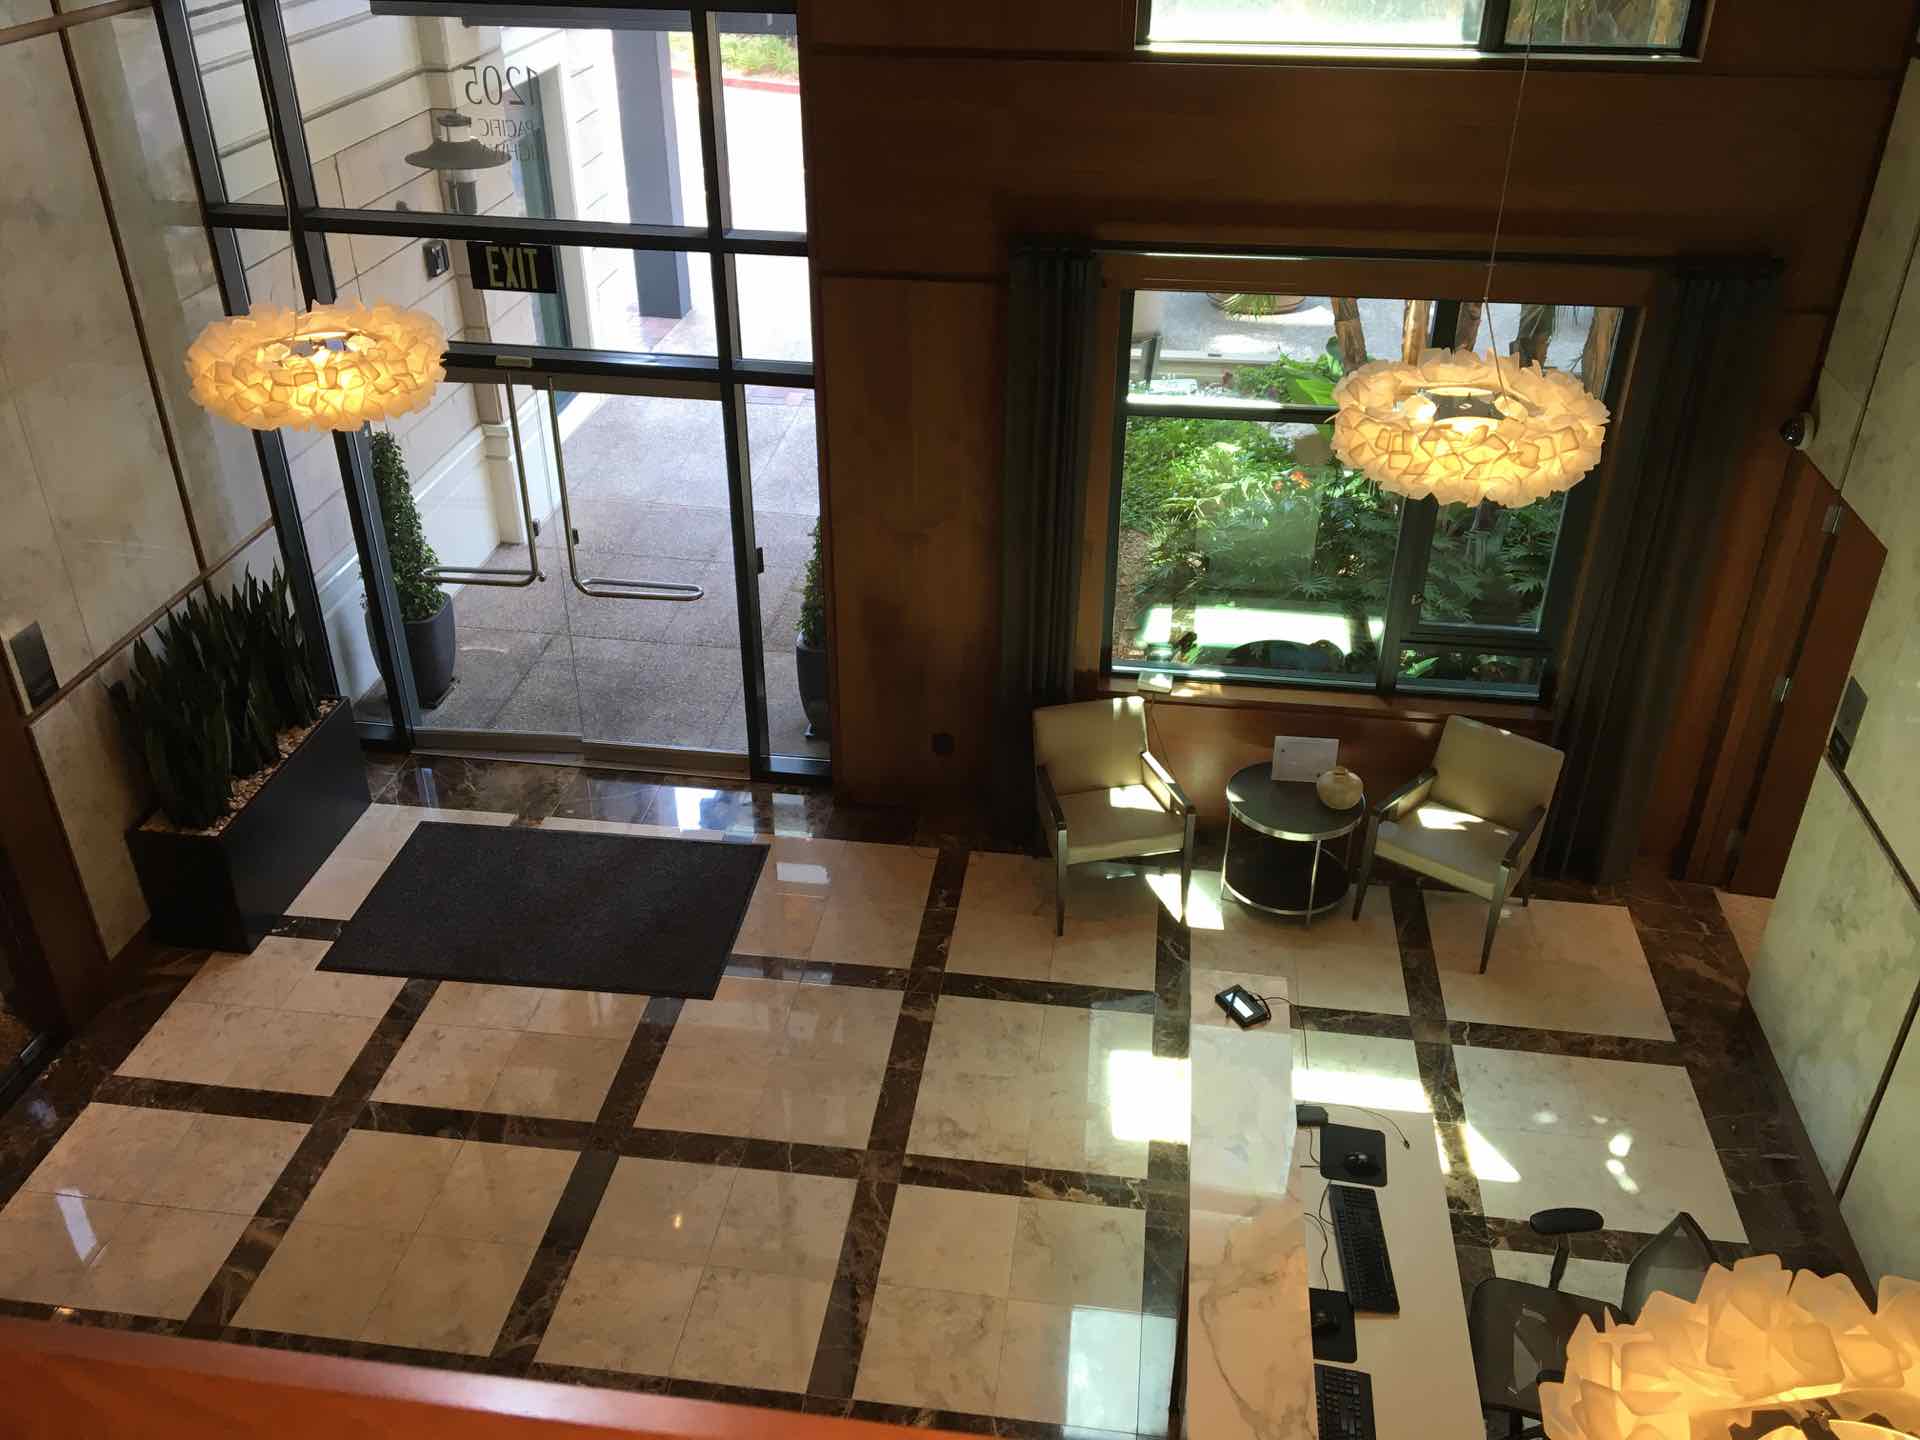 North tower lobby seen from second floor atrium